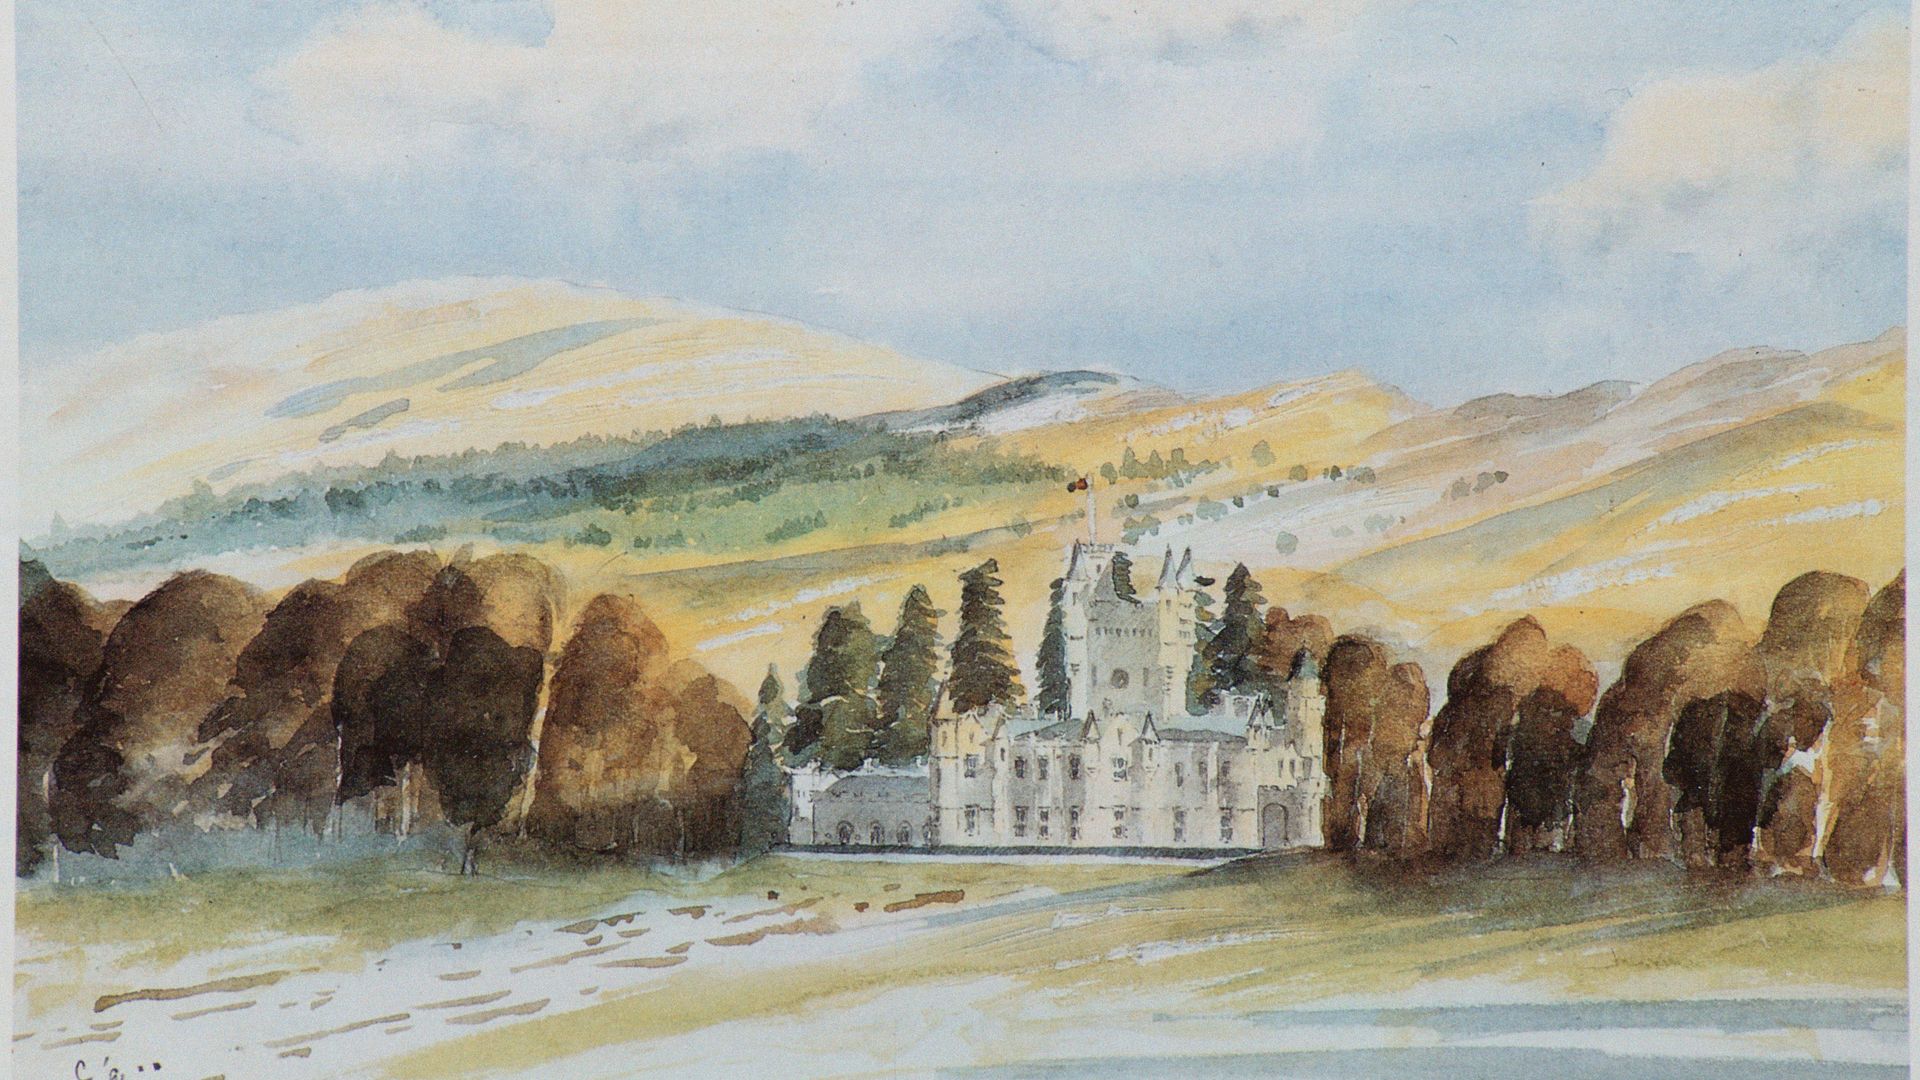 A watercolour painting of Balmoral by King Charles